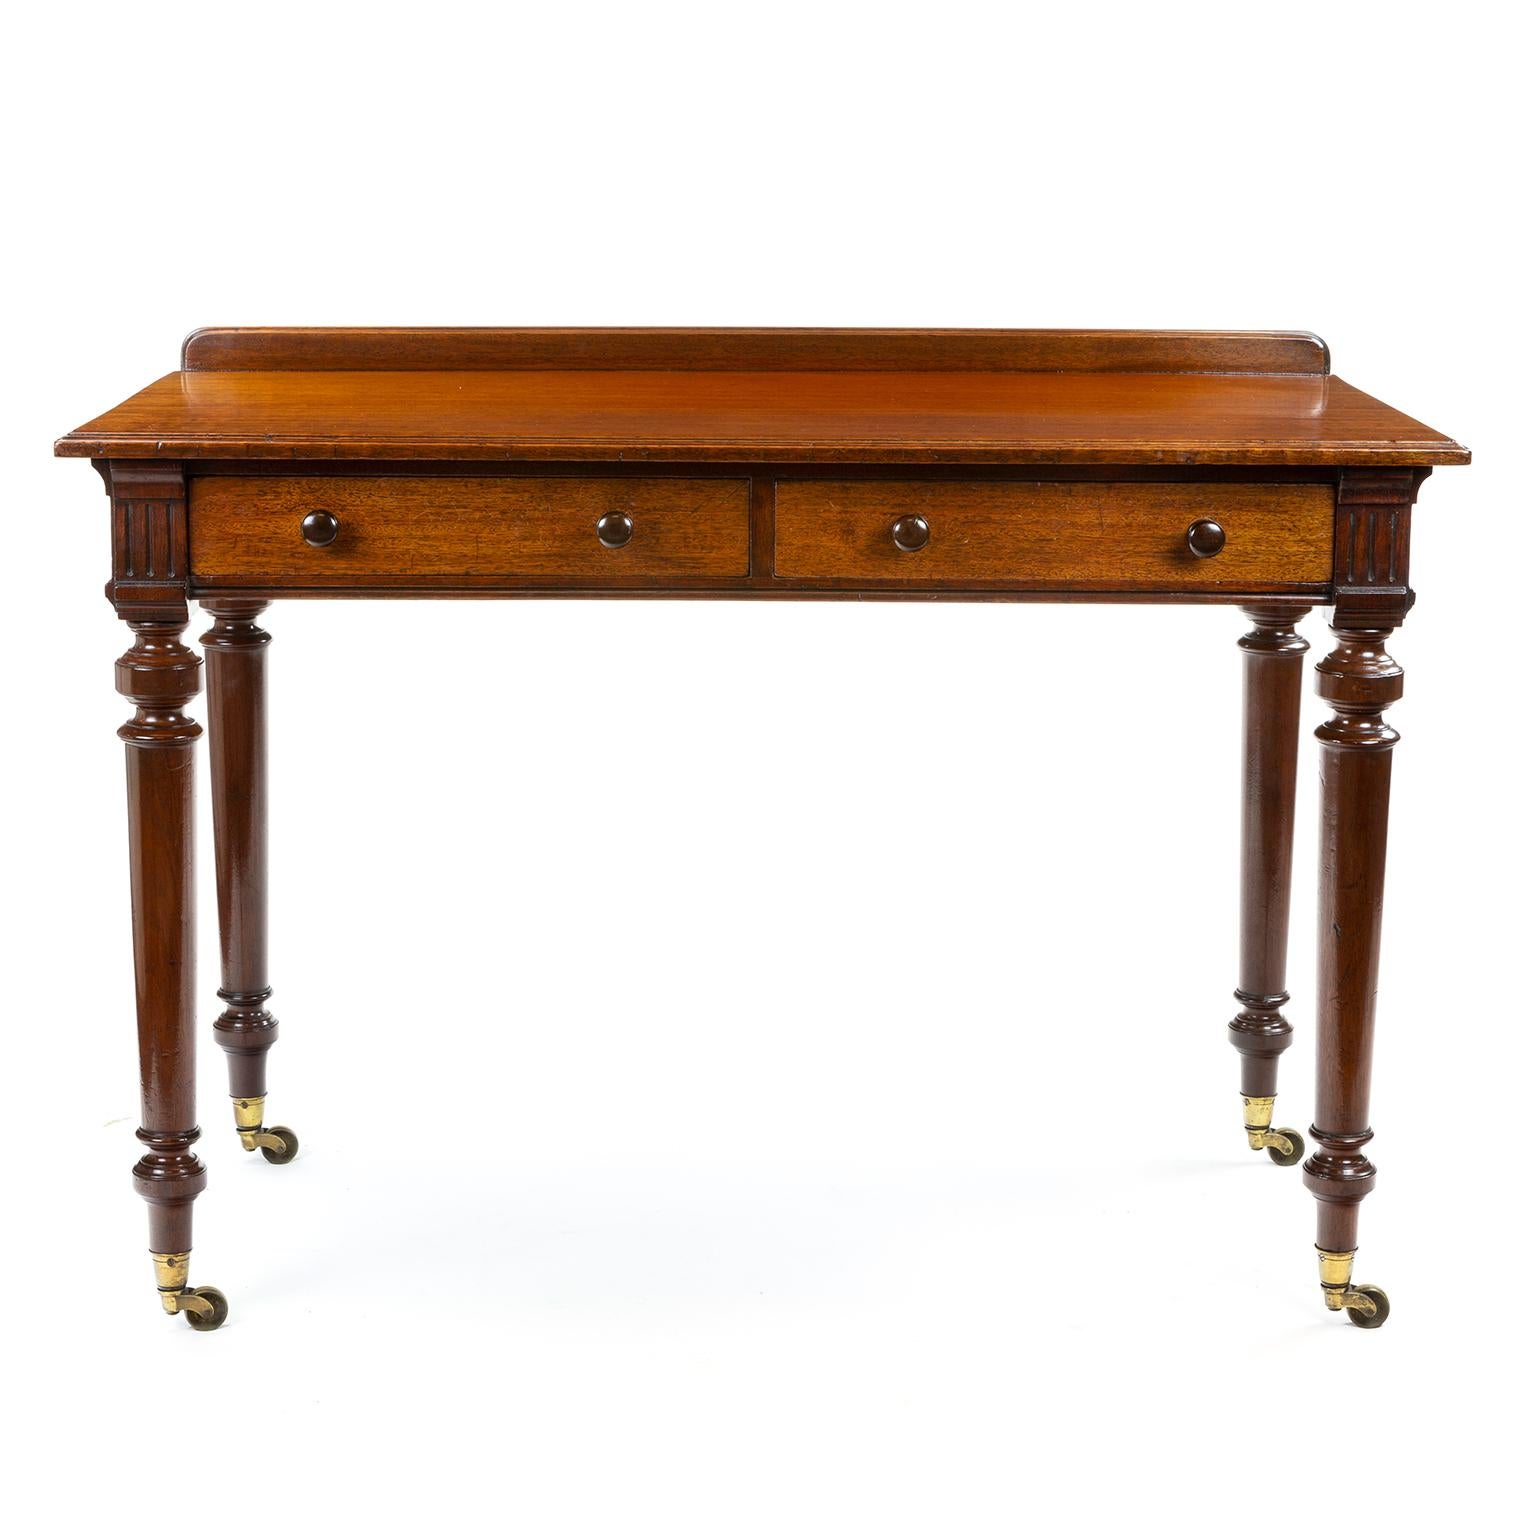 Victorian Gillows Mahogany Two Draw Side or Writing Table, 1860/70